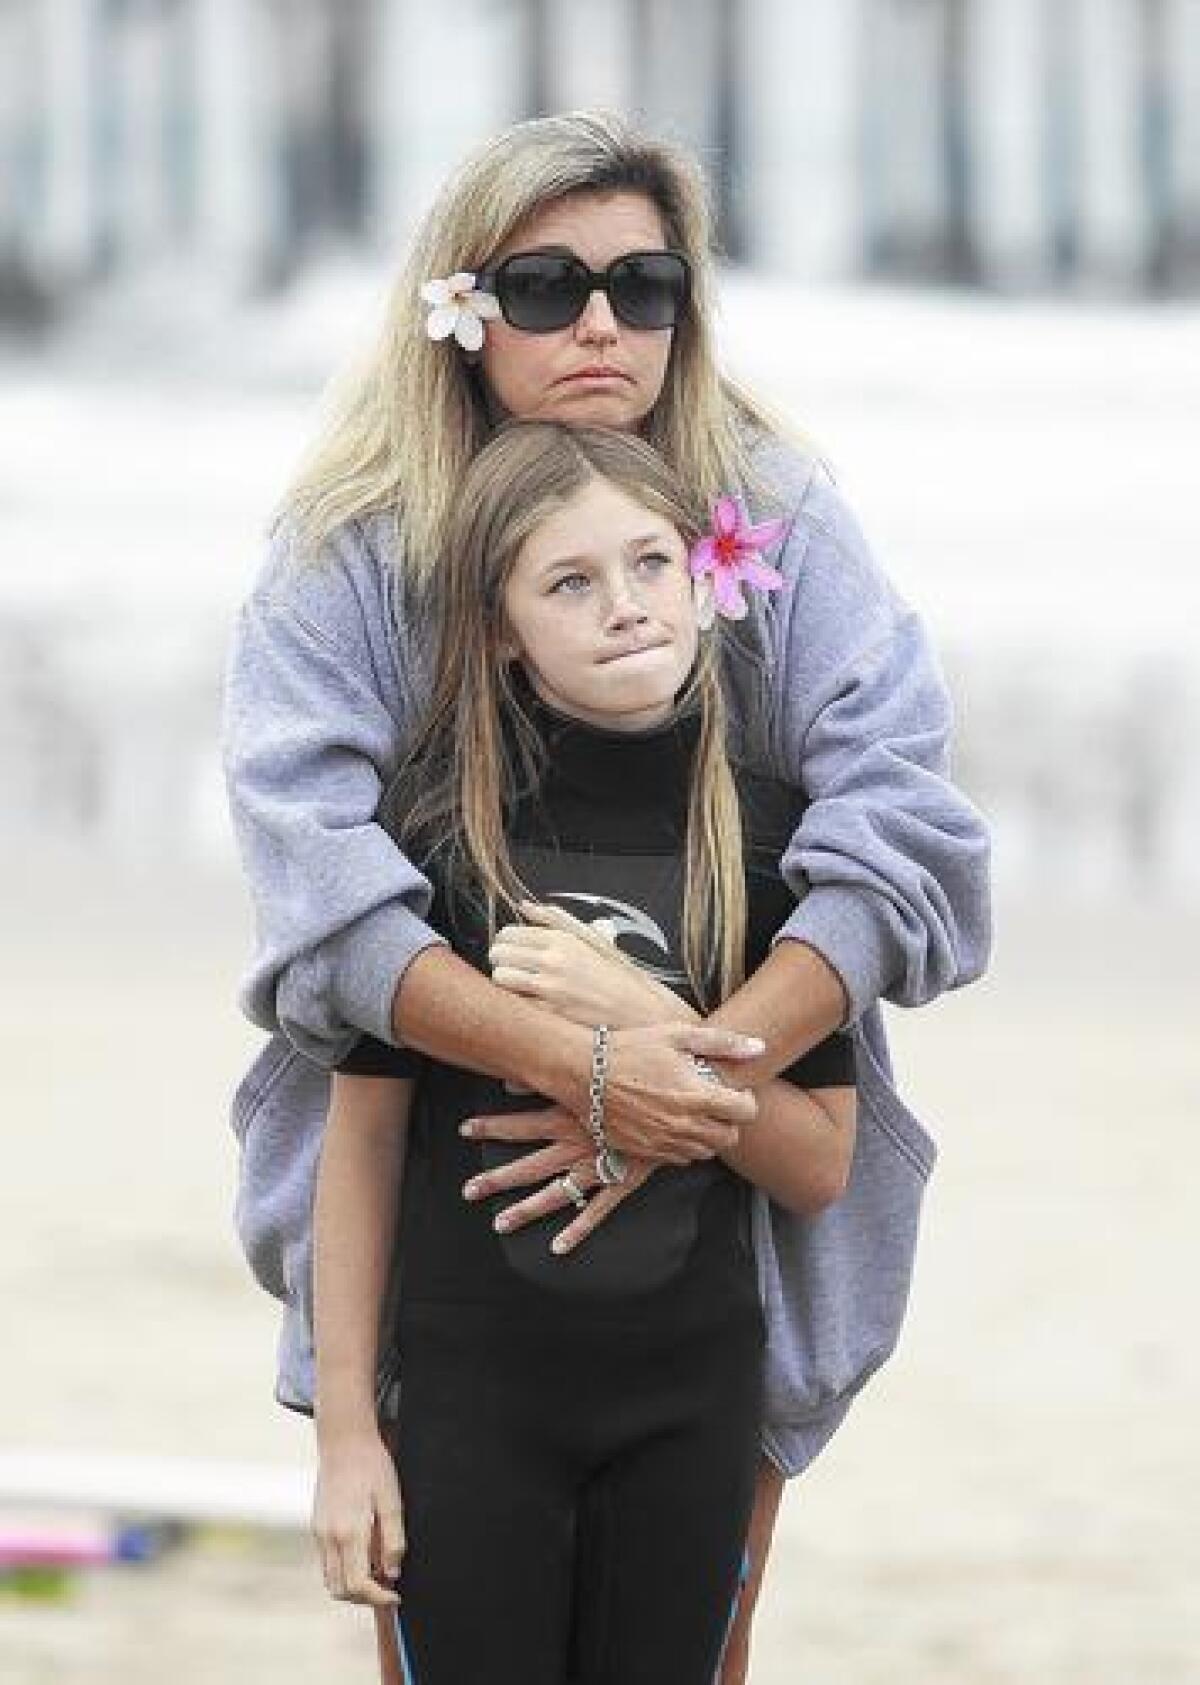 Kori Johnson and her daughter Kyra, 10, look on as friends and family prepare to participate in her husband Kyle's memorial paddleout at the Newport Pier on Saturday. Kyle Johnson was involved in an automobile accident near the Arizona-California border on Father's Day, and died early the next morning. He was 42.